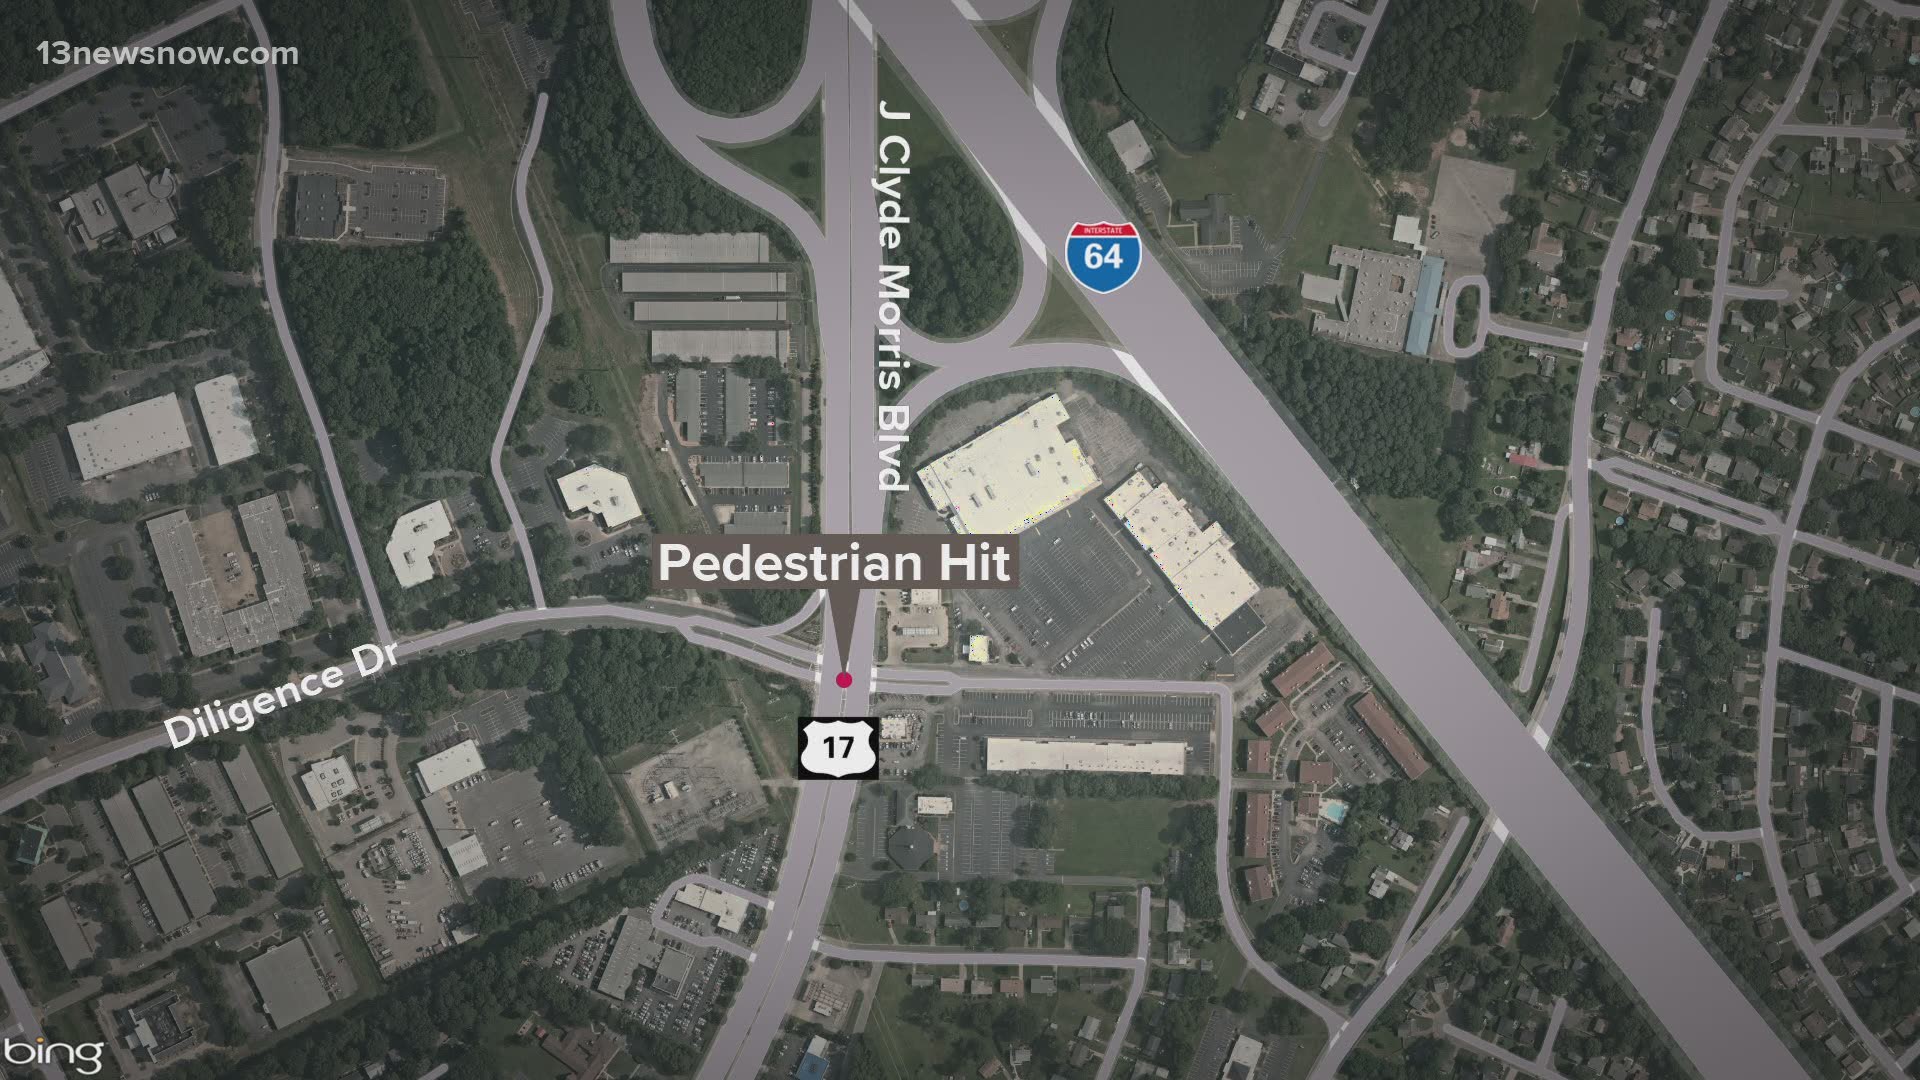 Newport News police are investigating an incident of a pedestrian who was hit by a vehicle in the area of J Clyde Morris Boulevard and Diligence Drive.